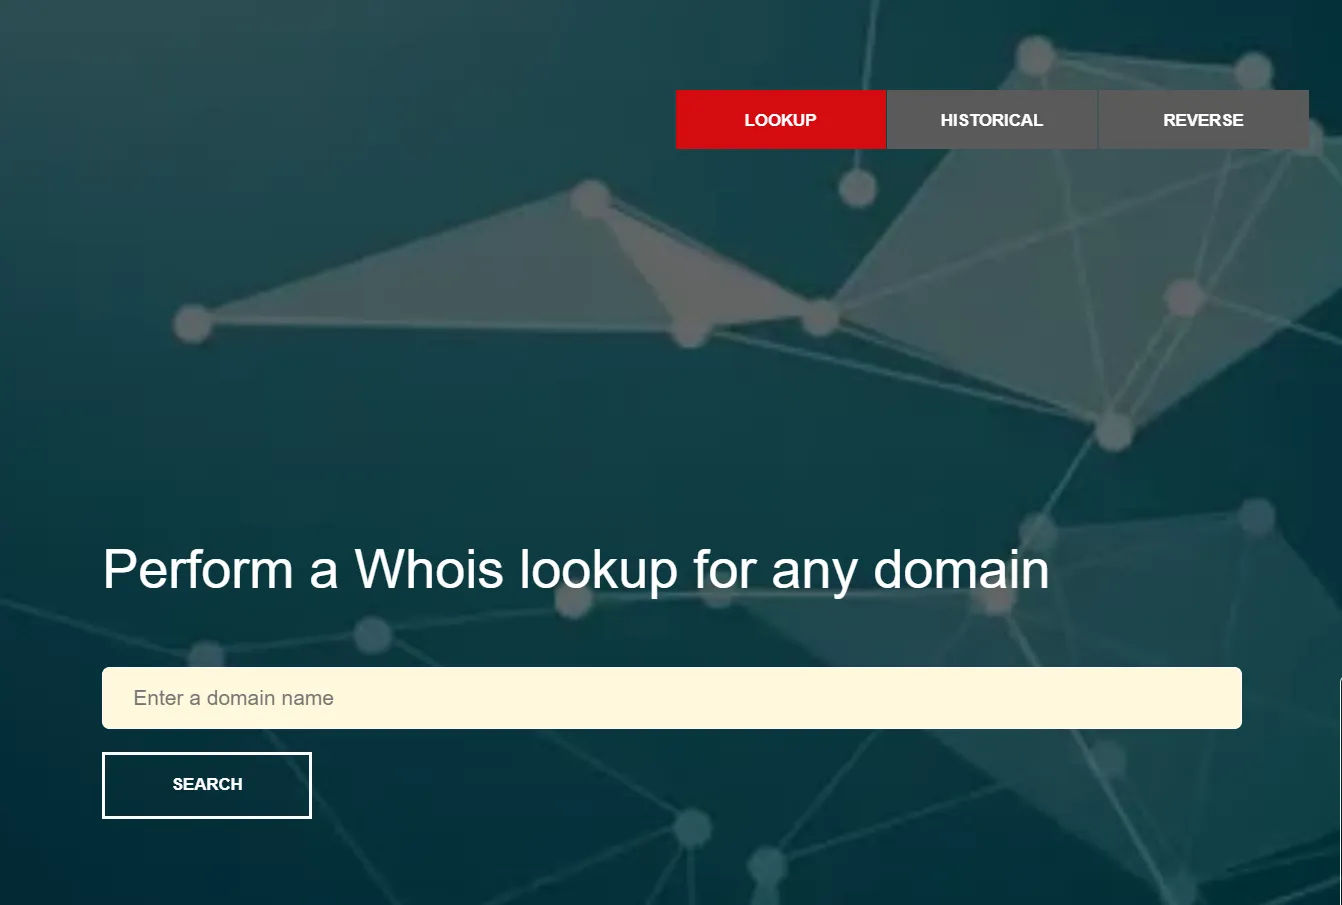 WhoIsFreaks' Historical WhoIs Lookup tool lets you perform a lookup on any domain name.